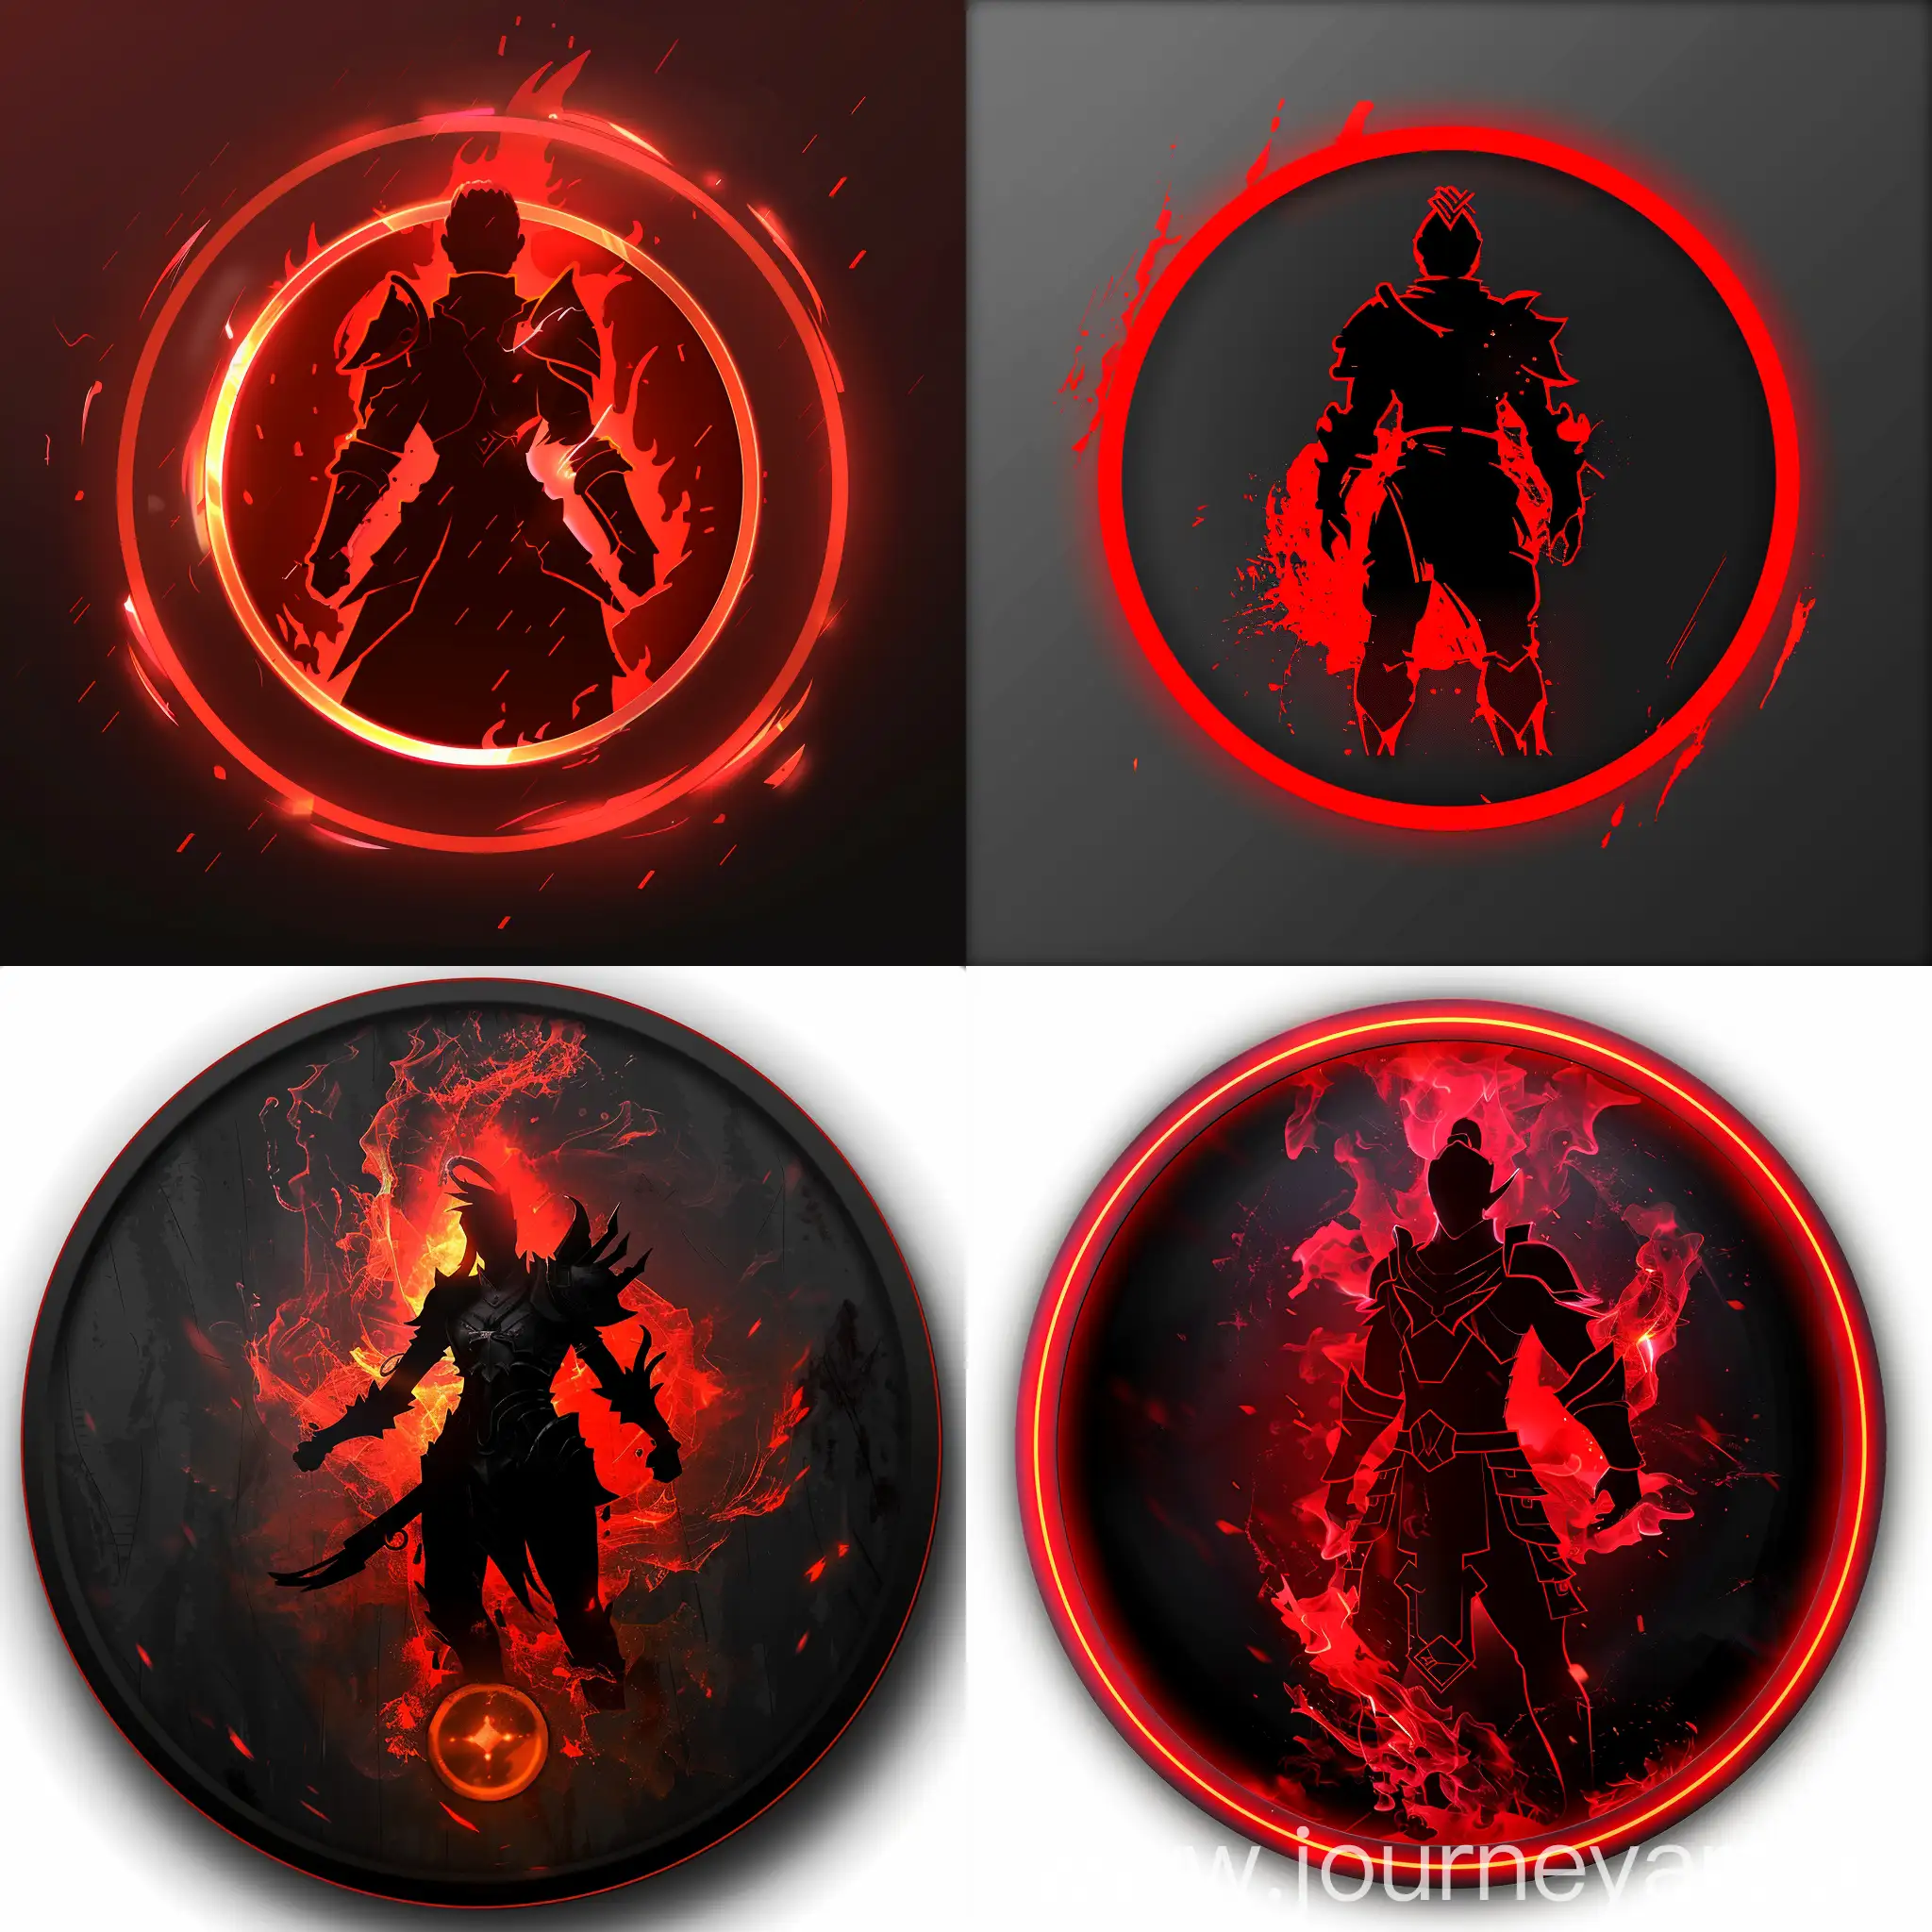 a skill button of a mobile moba game, icon, circle icon, there is a silhouette of a person  in armor dashing, dashing figure, splash art, conceptual art, in style of dark red